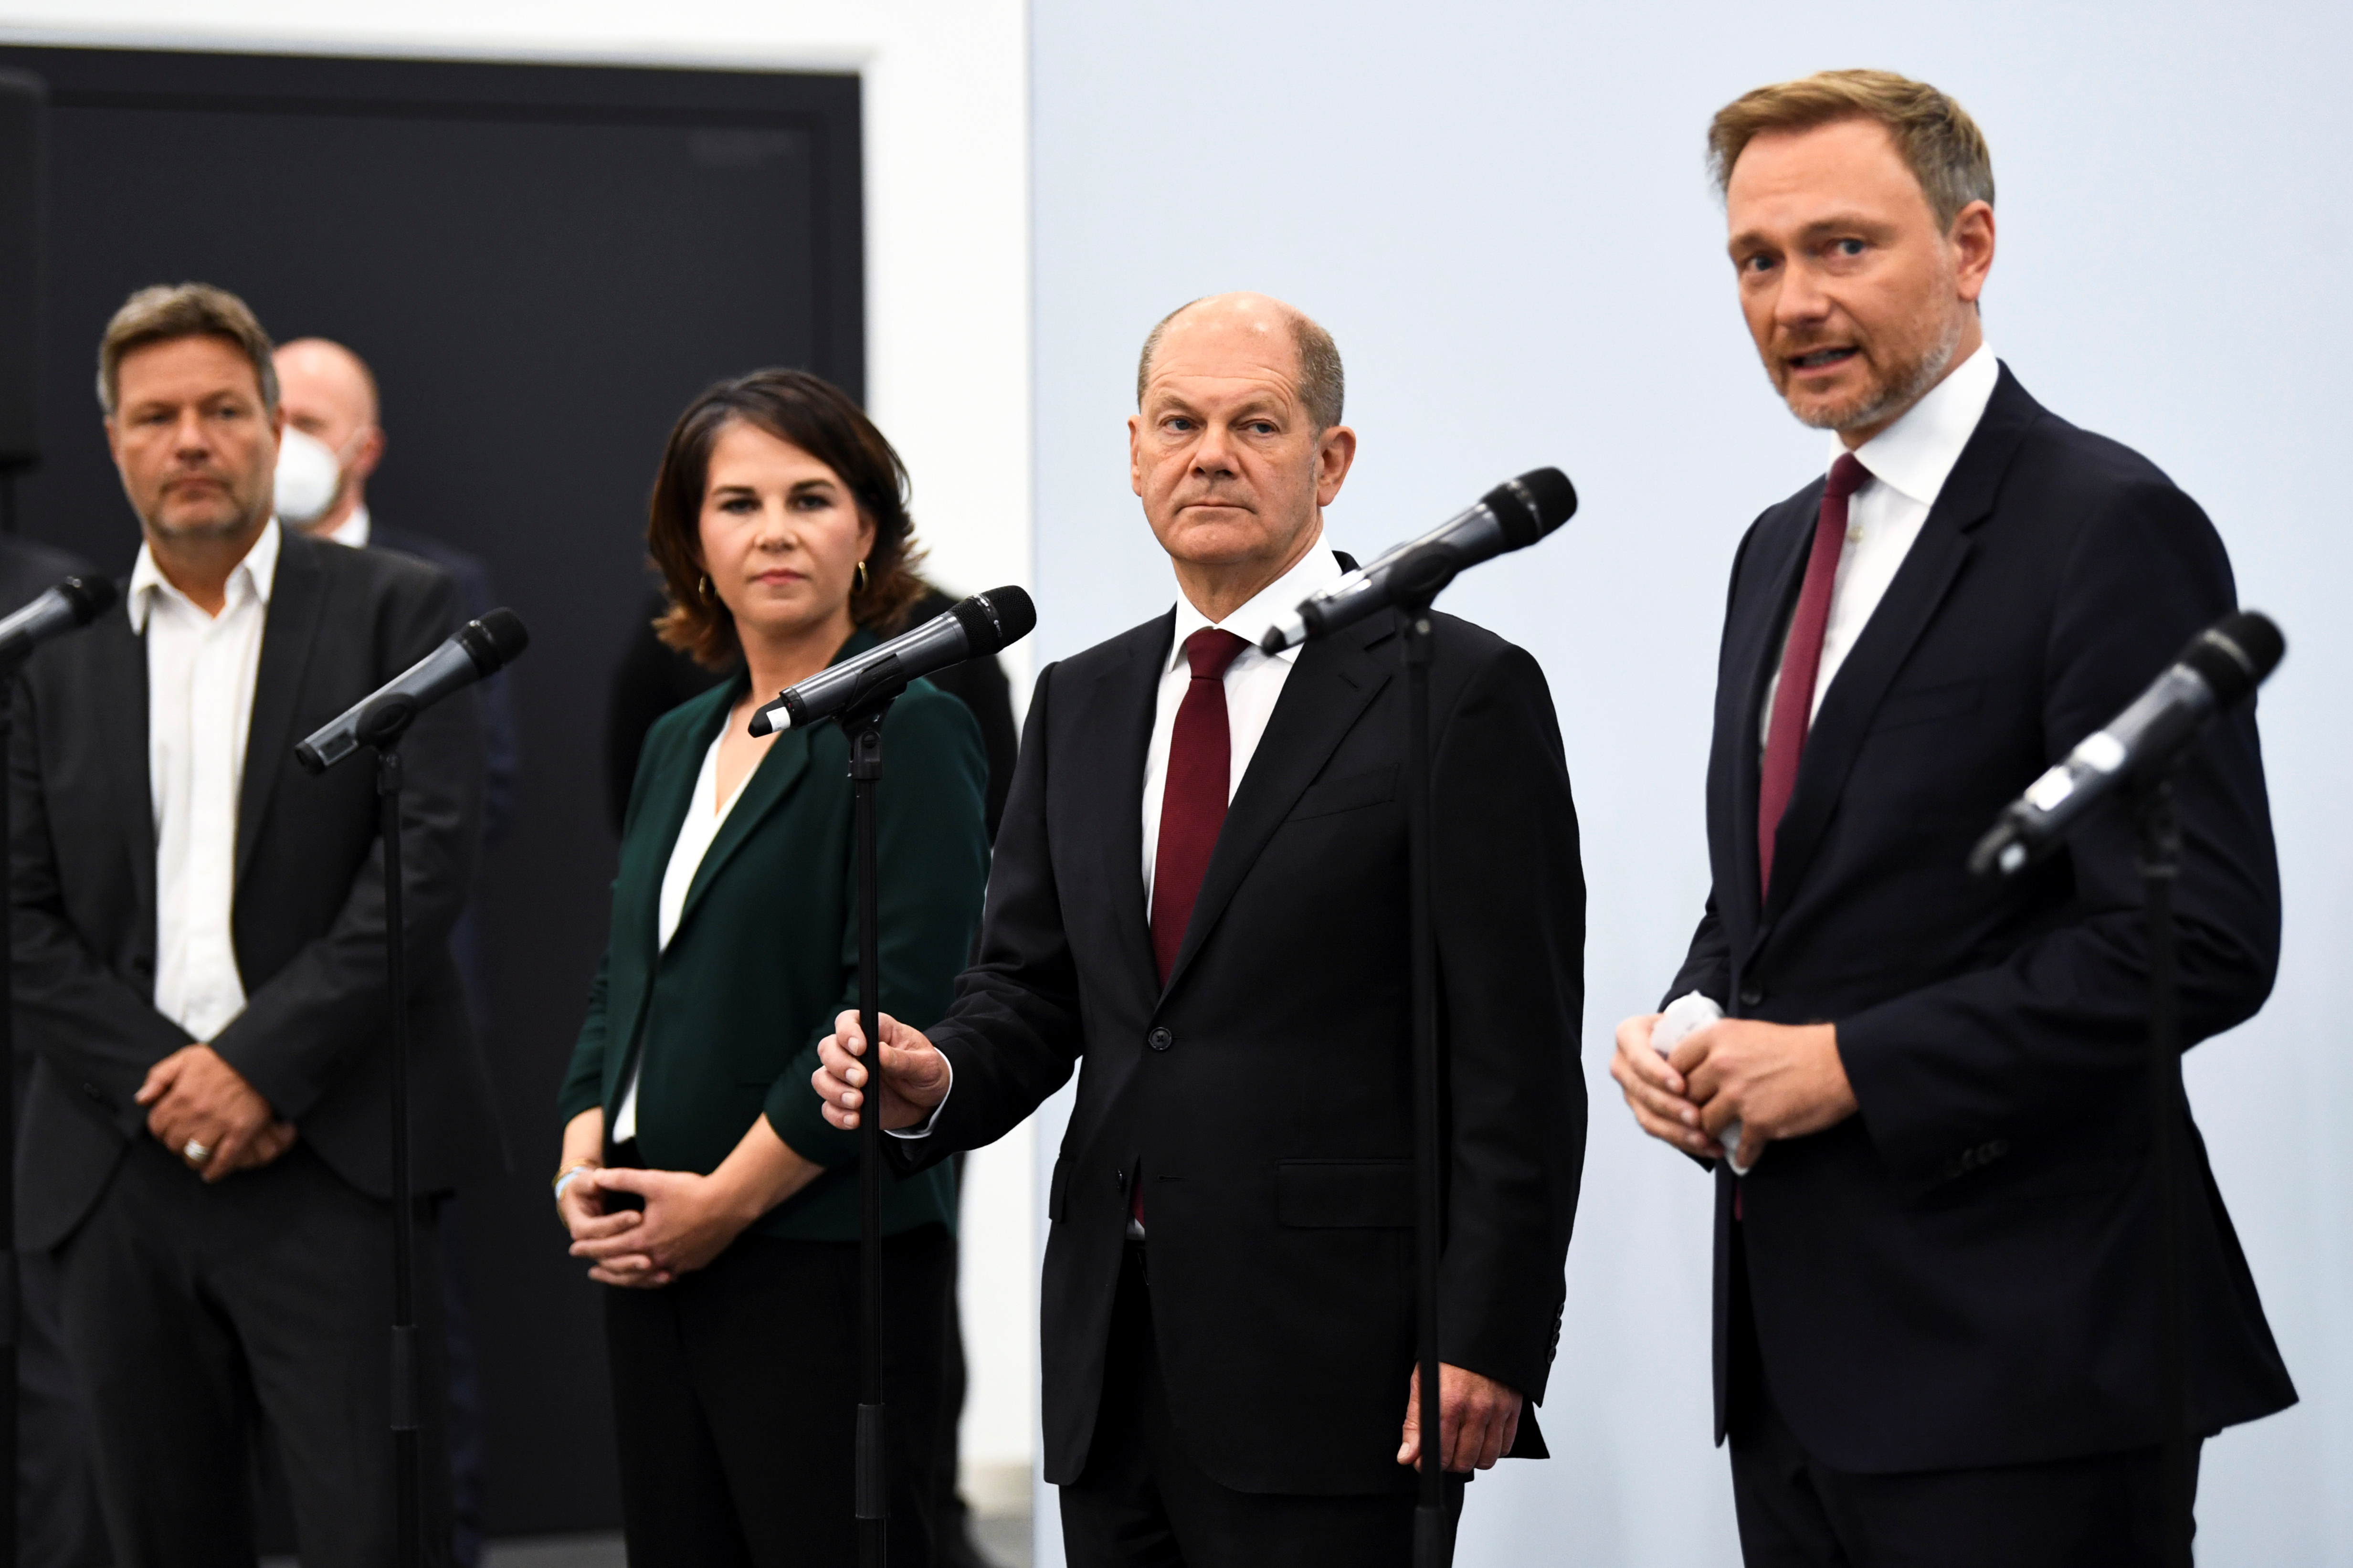 Germany's Greens party co-leaders Robert Habeck and Annalena Baerbock and Social Democratic Party (SPD) top candidate for chancellor Olaf Scholz listen to Free Democratic Party (FDP) leader Christian Lindner as he gives a statement following a meeting for exploratory talks for a possible new government coalition in Berlin, Germany, October 15, 2021. REUTERS/Annegret Hilse